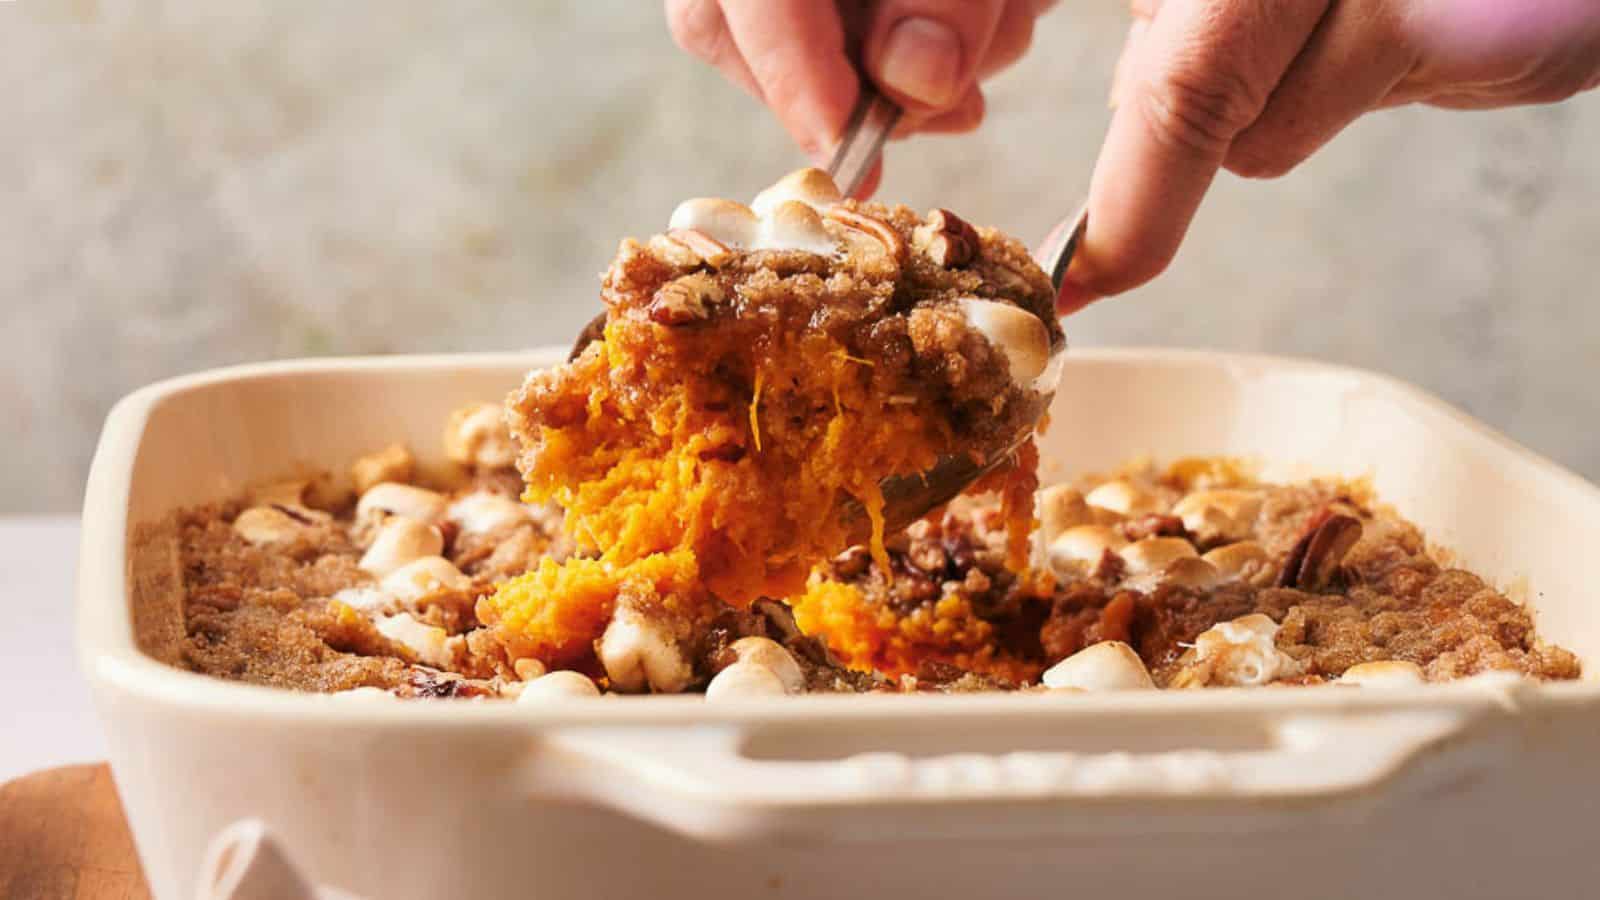 A person scooping a sweet potato casserole out of a baking dish.